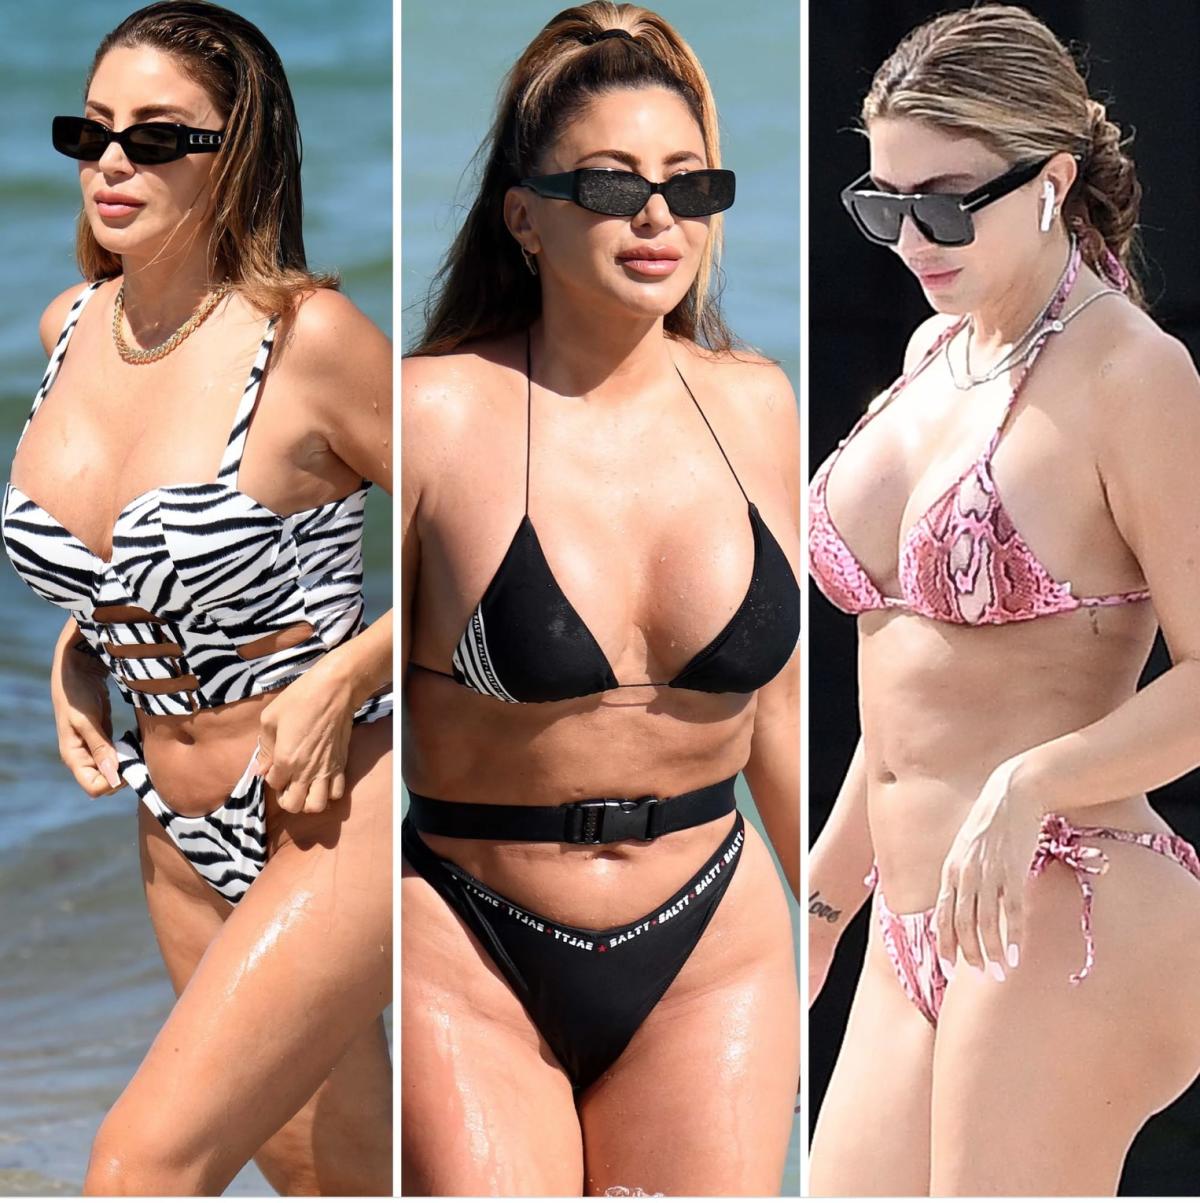 RHOMs Larsa Pippen Is a Bikini Superstar! See Her Incredible Curves in Sexy Swimwear Photos pic